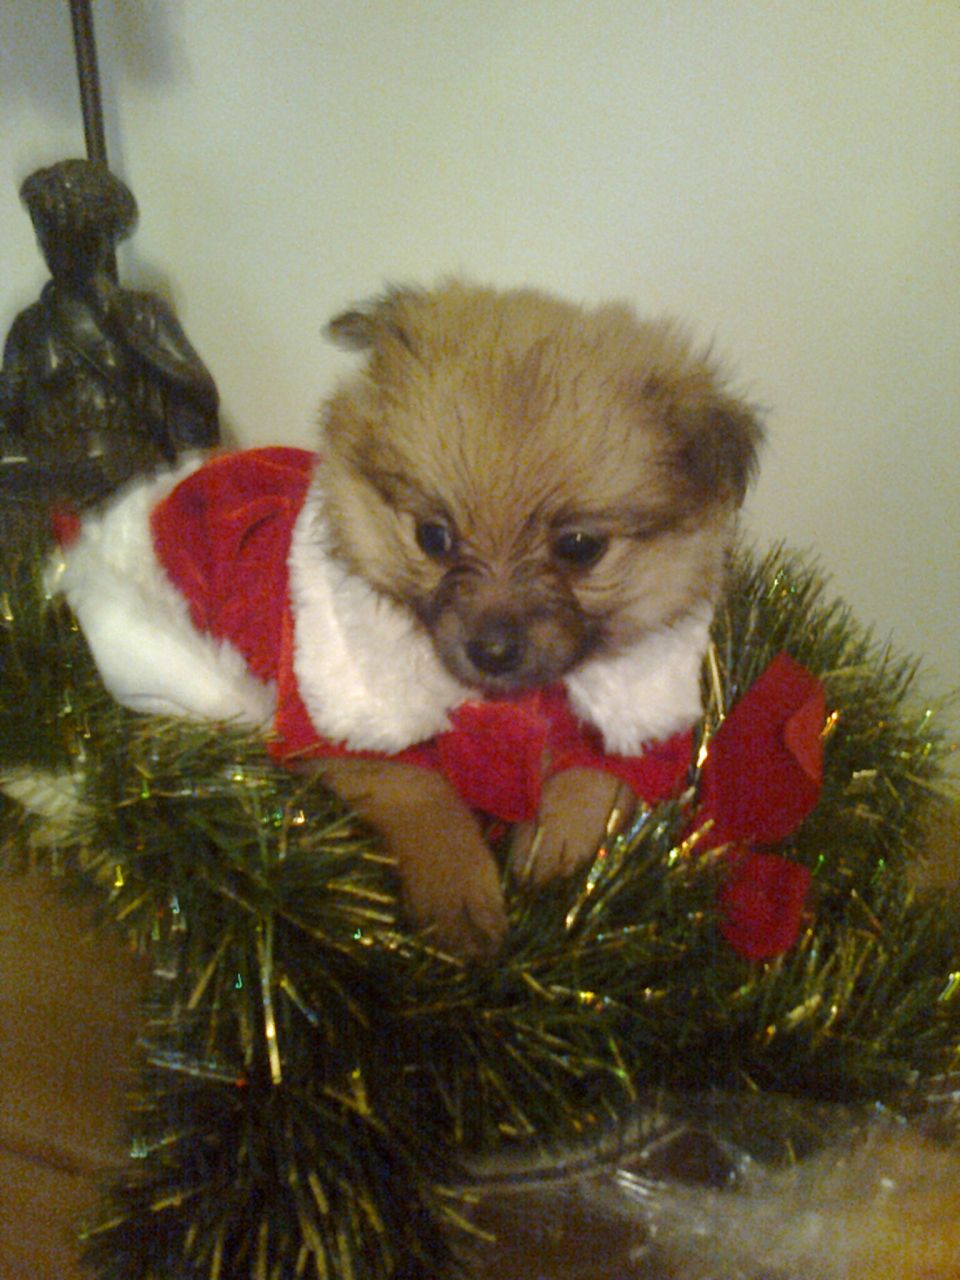 Adorable Pomeranian Puppies Need Forever Homes This X mass